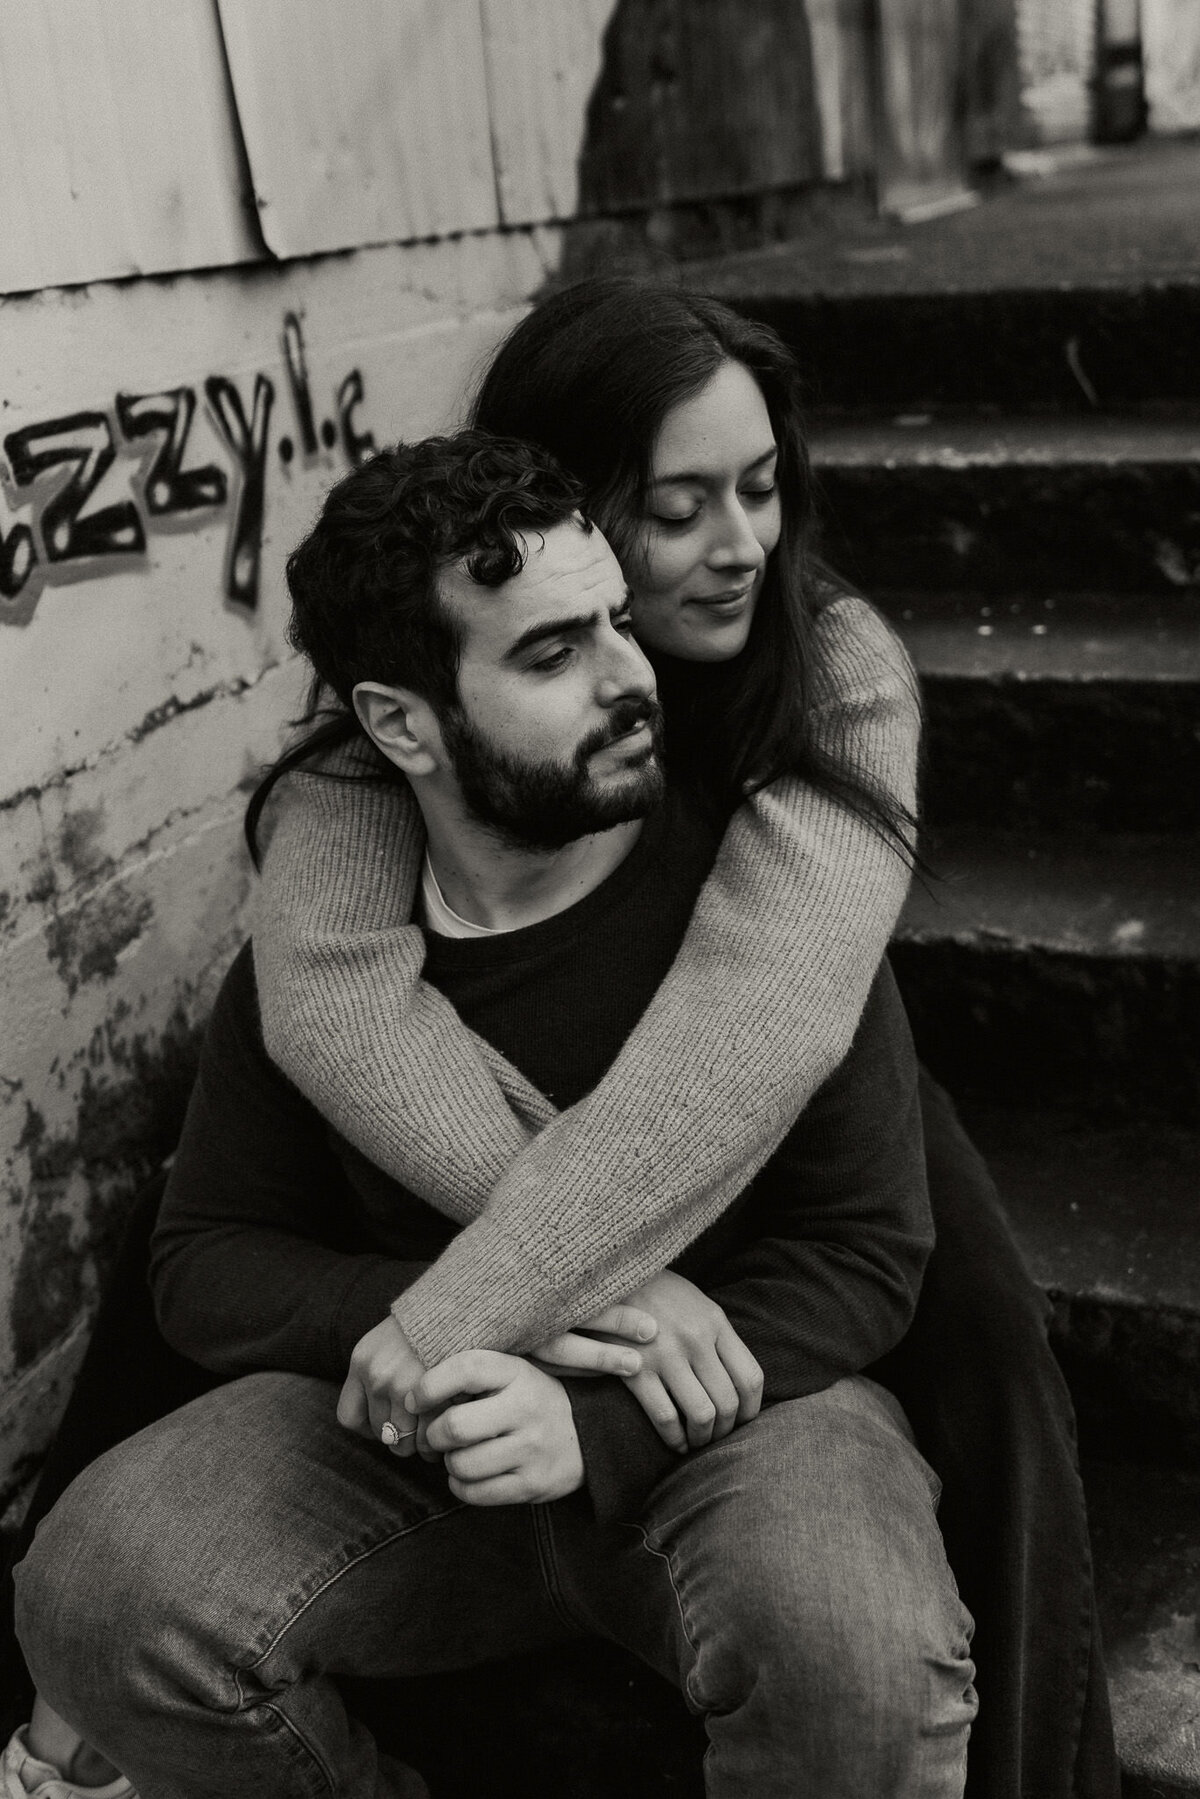 Urban engagement photo in black and white with couple sitting on steps with fiancee's arms wrapped around partner